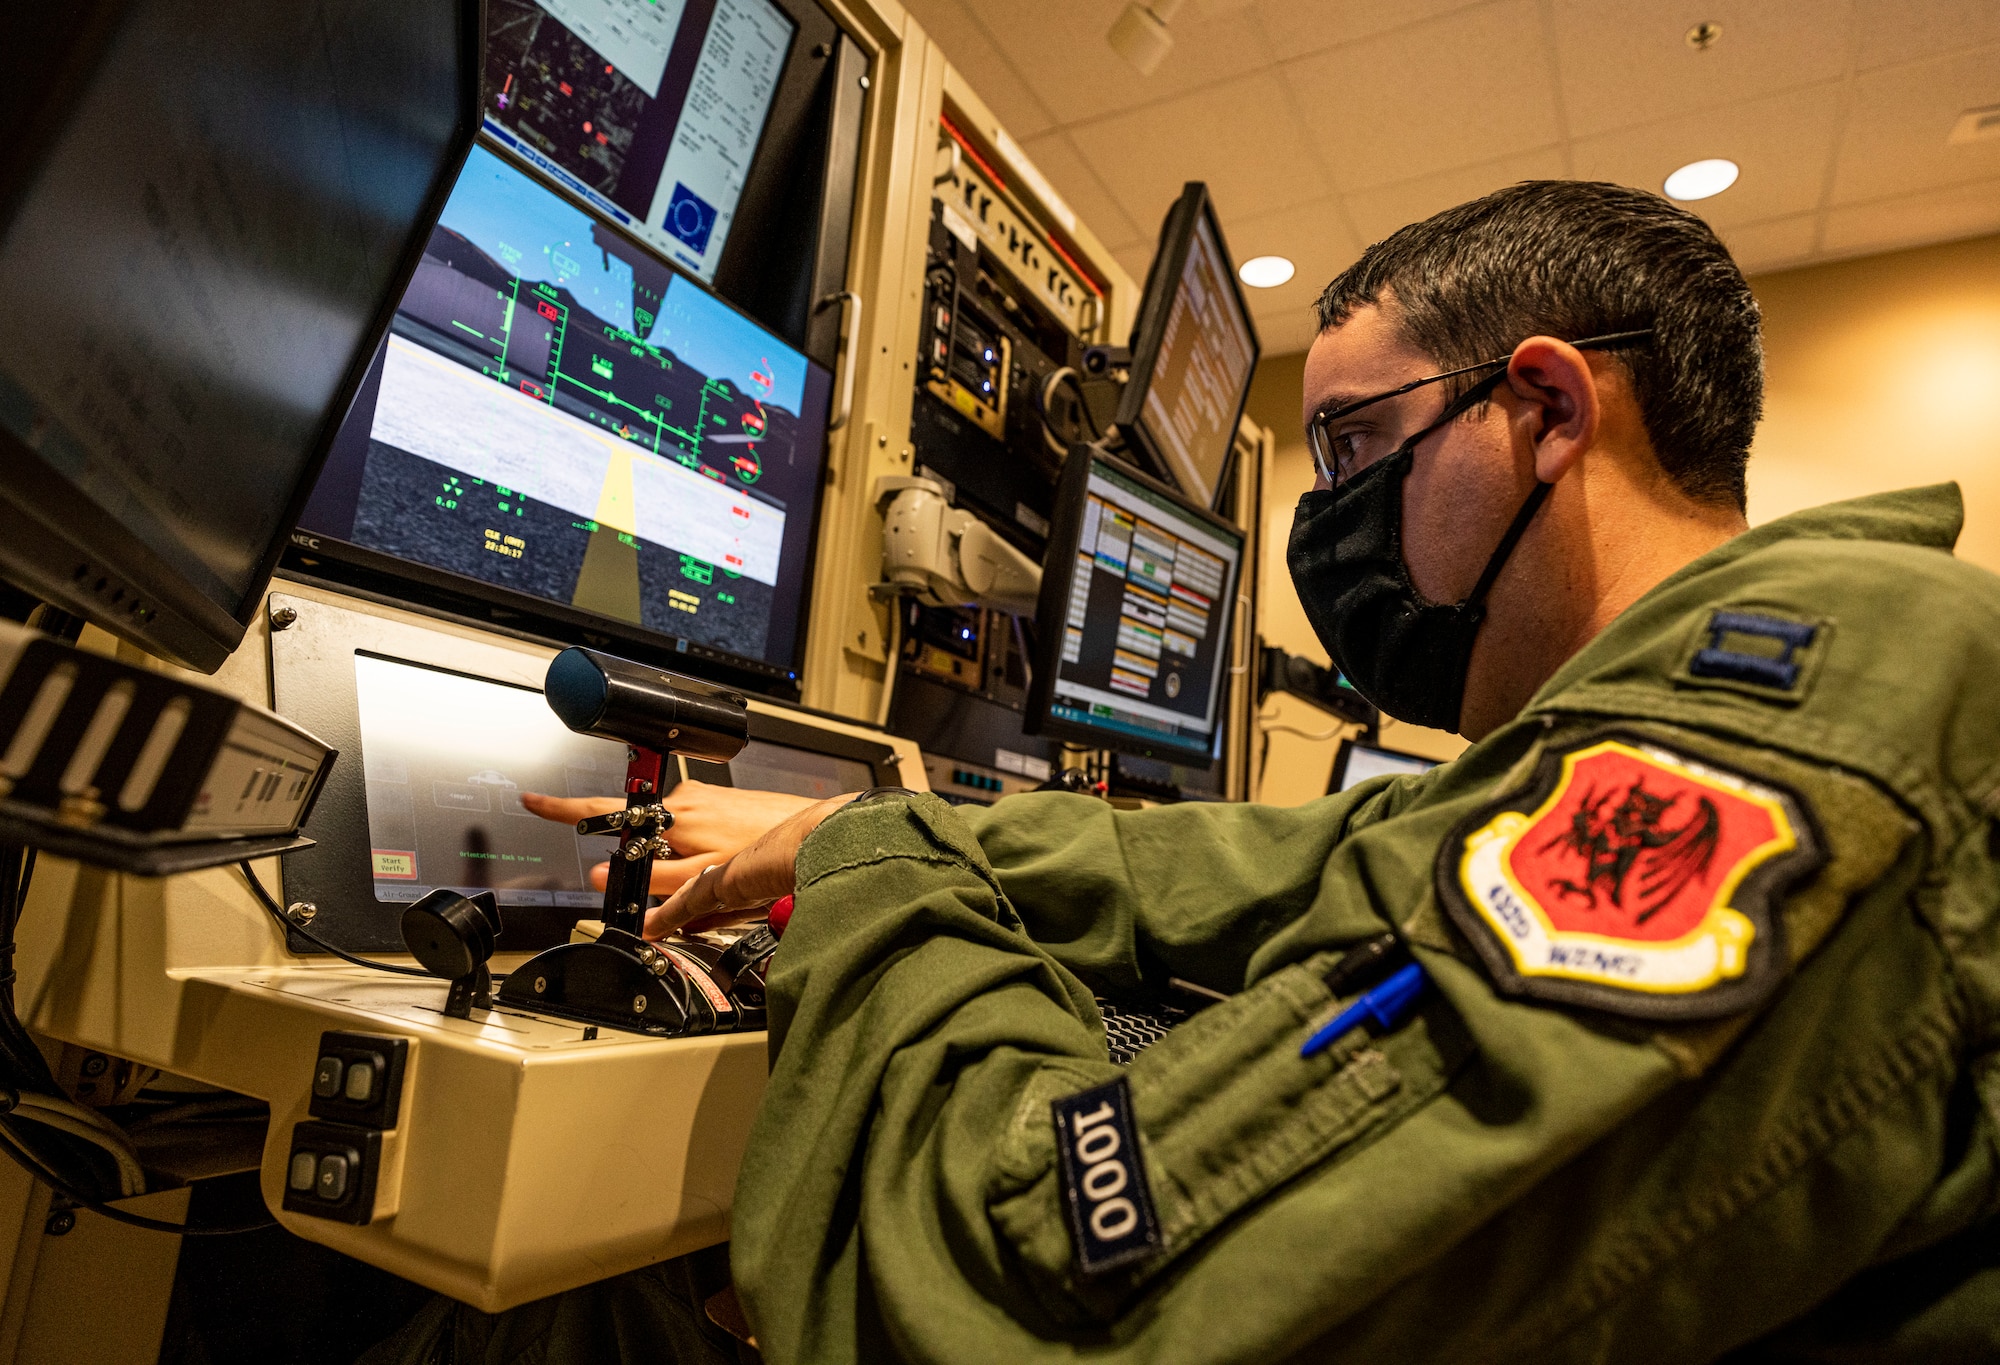 A pilot points at one of his monitors in a simulator.